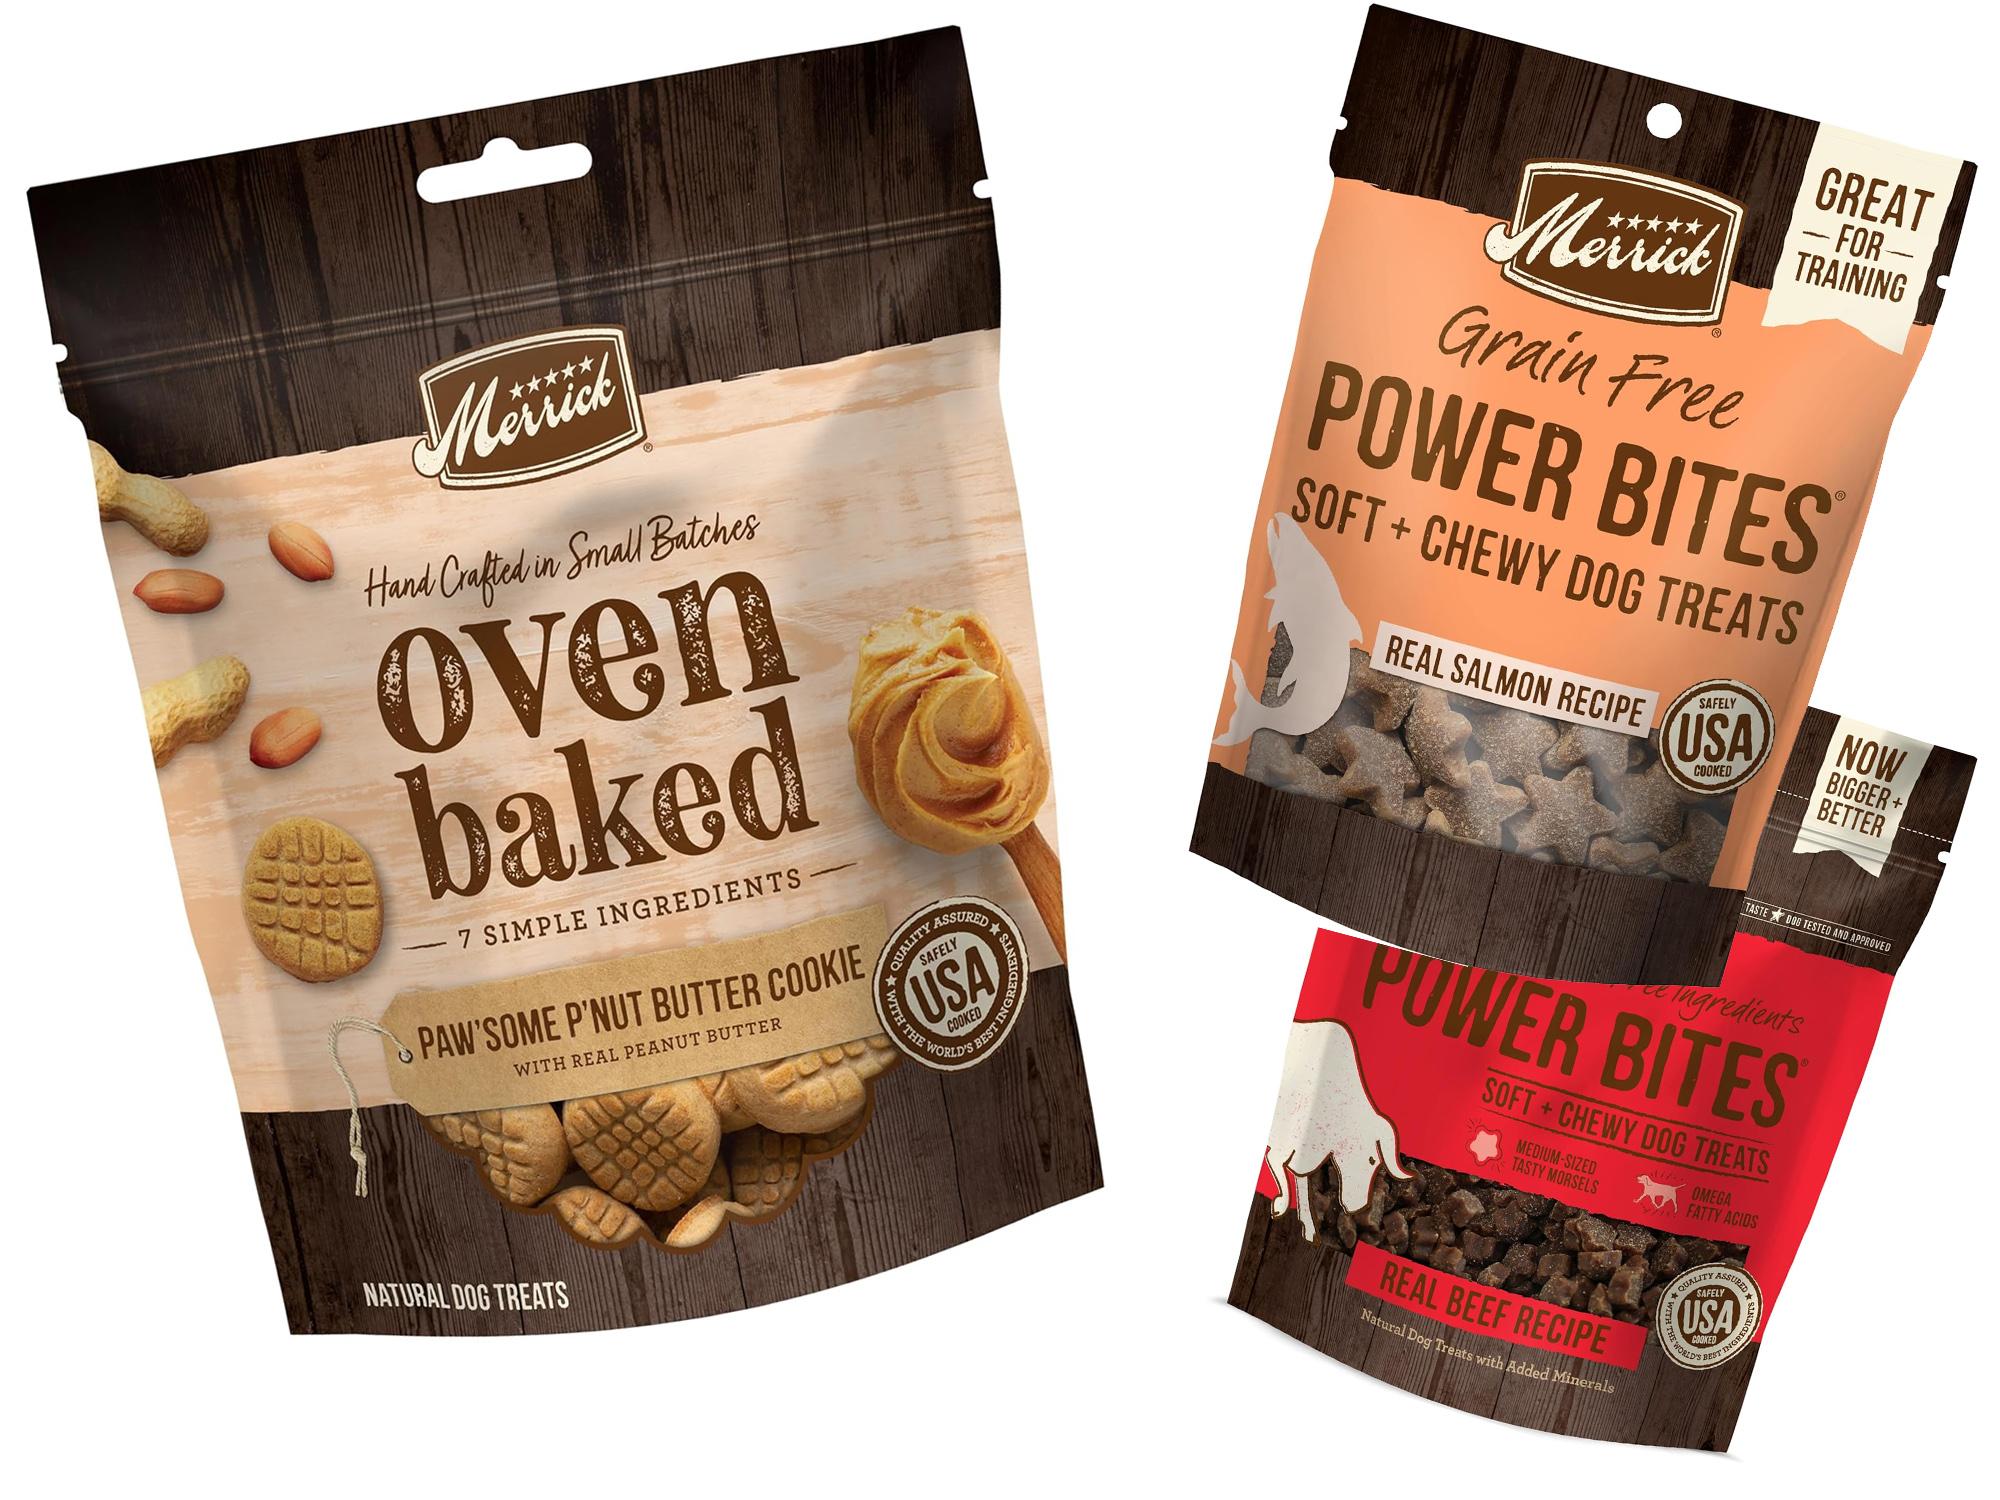 Merrick Oven Baked Dog Treats with 2 Power Bites for $10.57